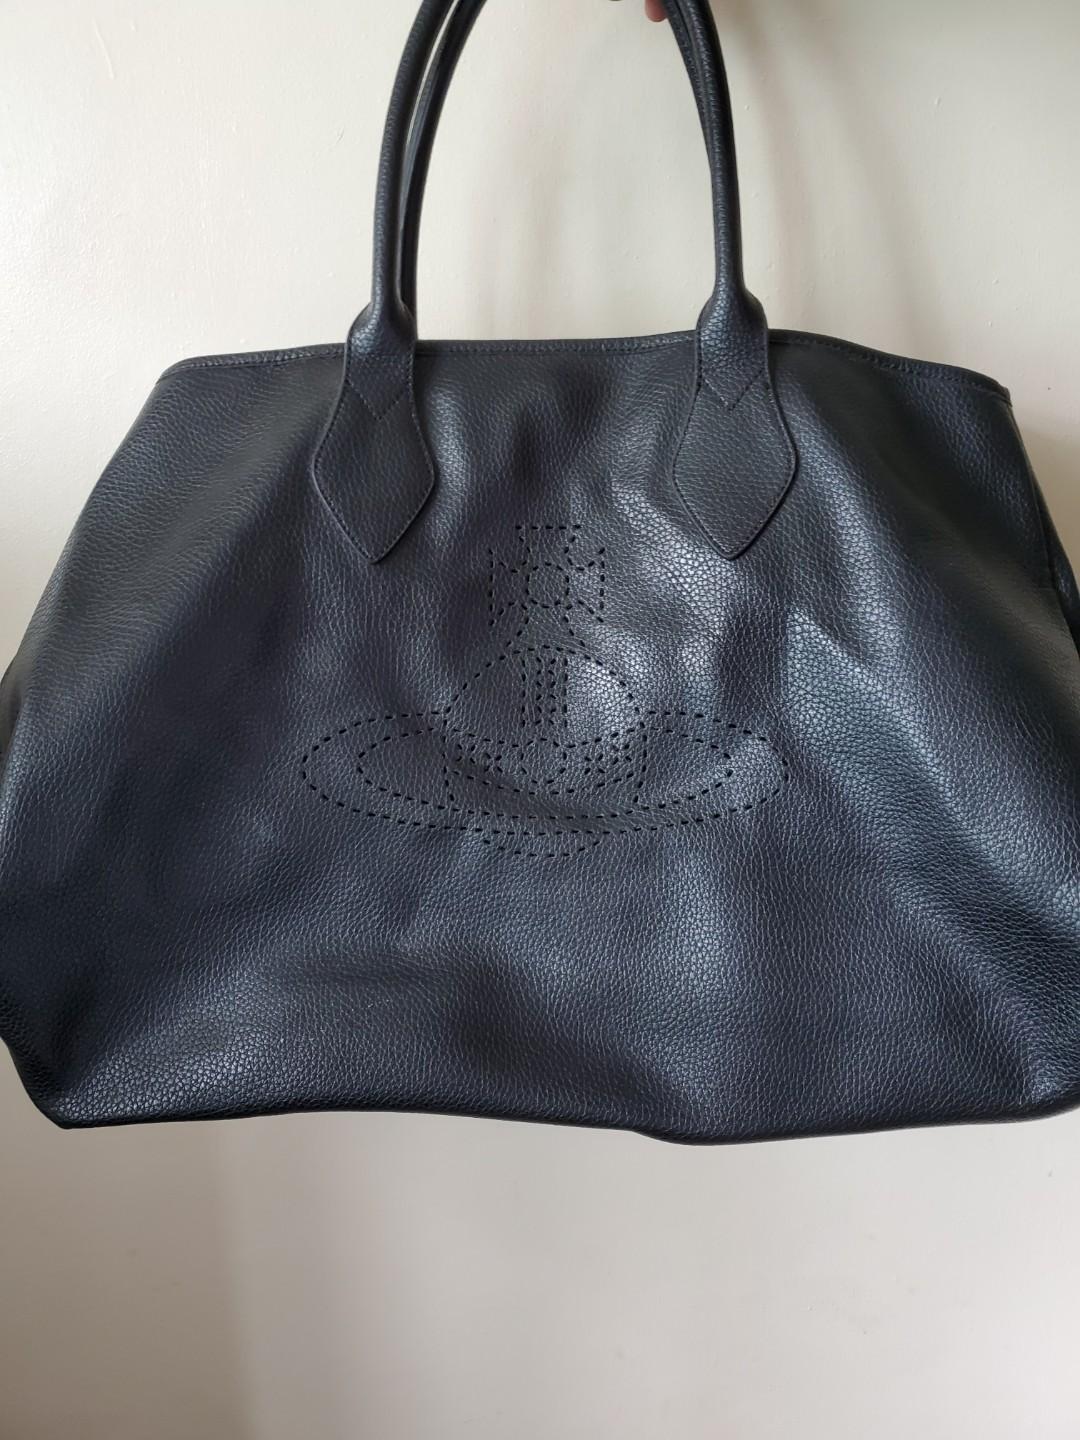 SALE! Authentic Vivienne Westwood XL genuine leather tote photo view 1